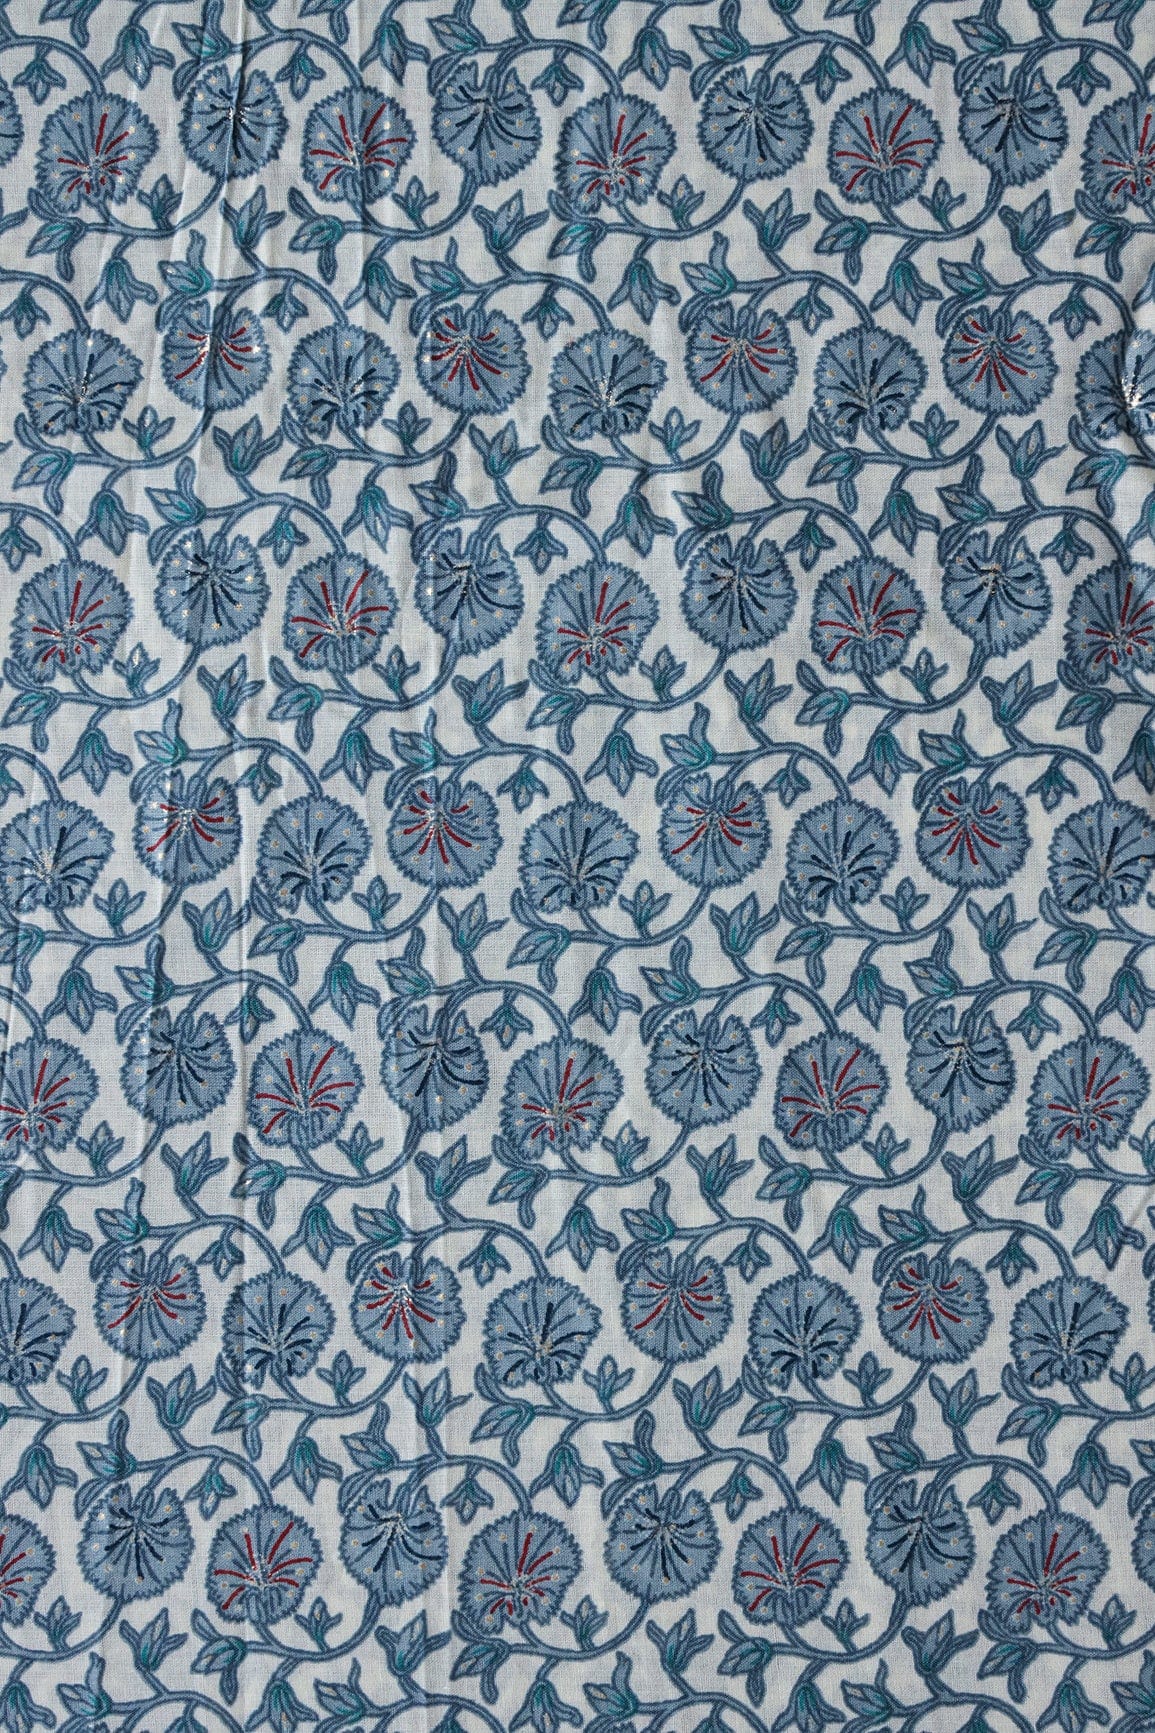 doeraa Prints Grey And White Floral Foil Print On Pure Mul Cotton Fabric